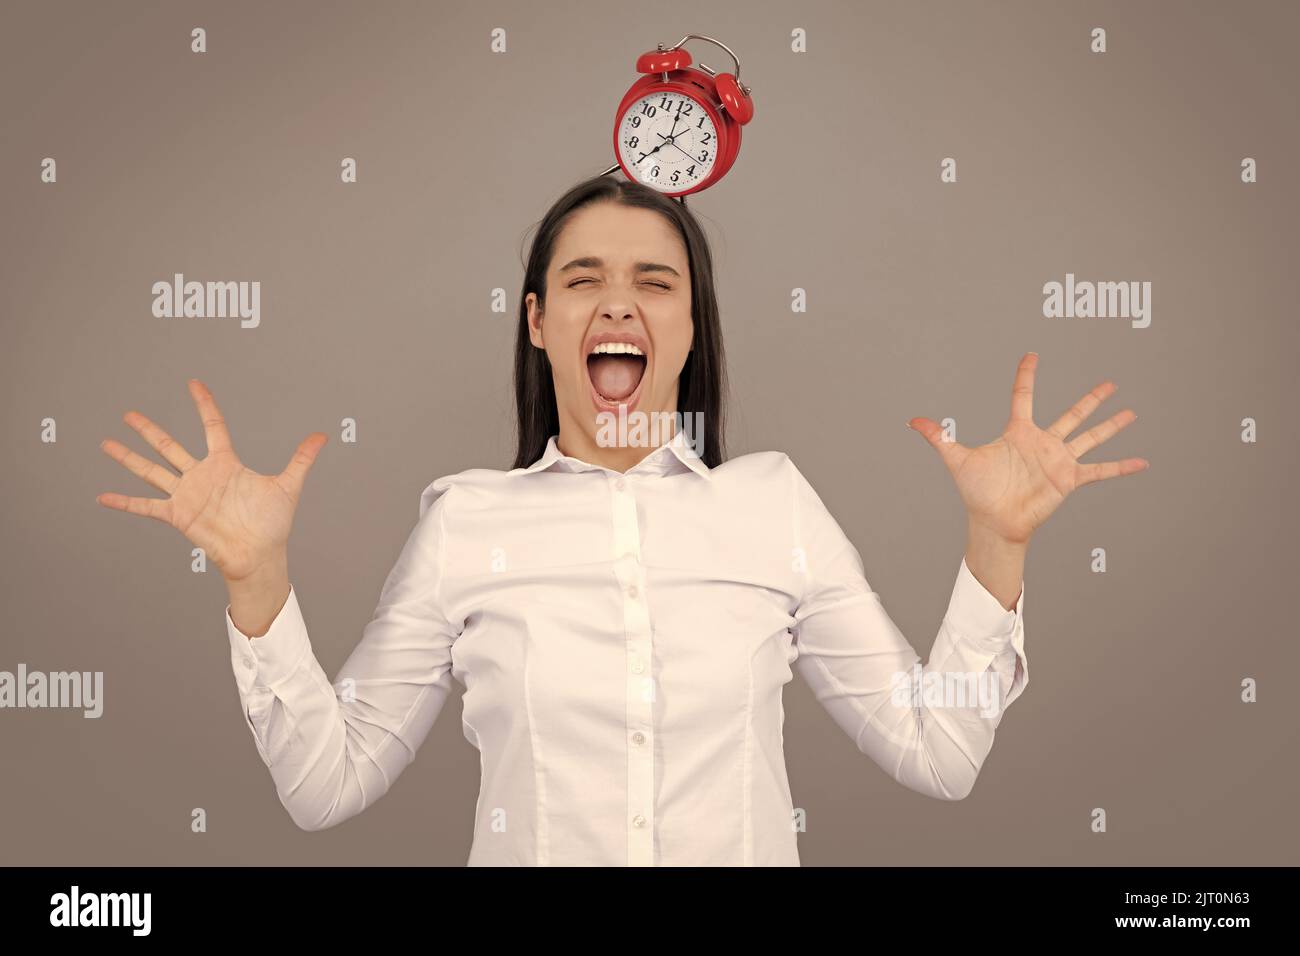 Funny girl hold alarm clock isolated on gray background. Stock Photo